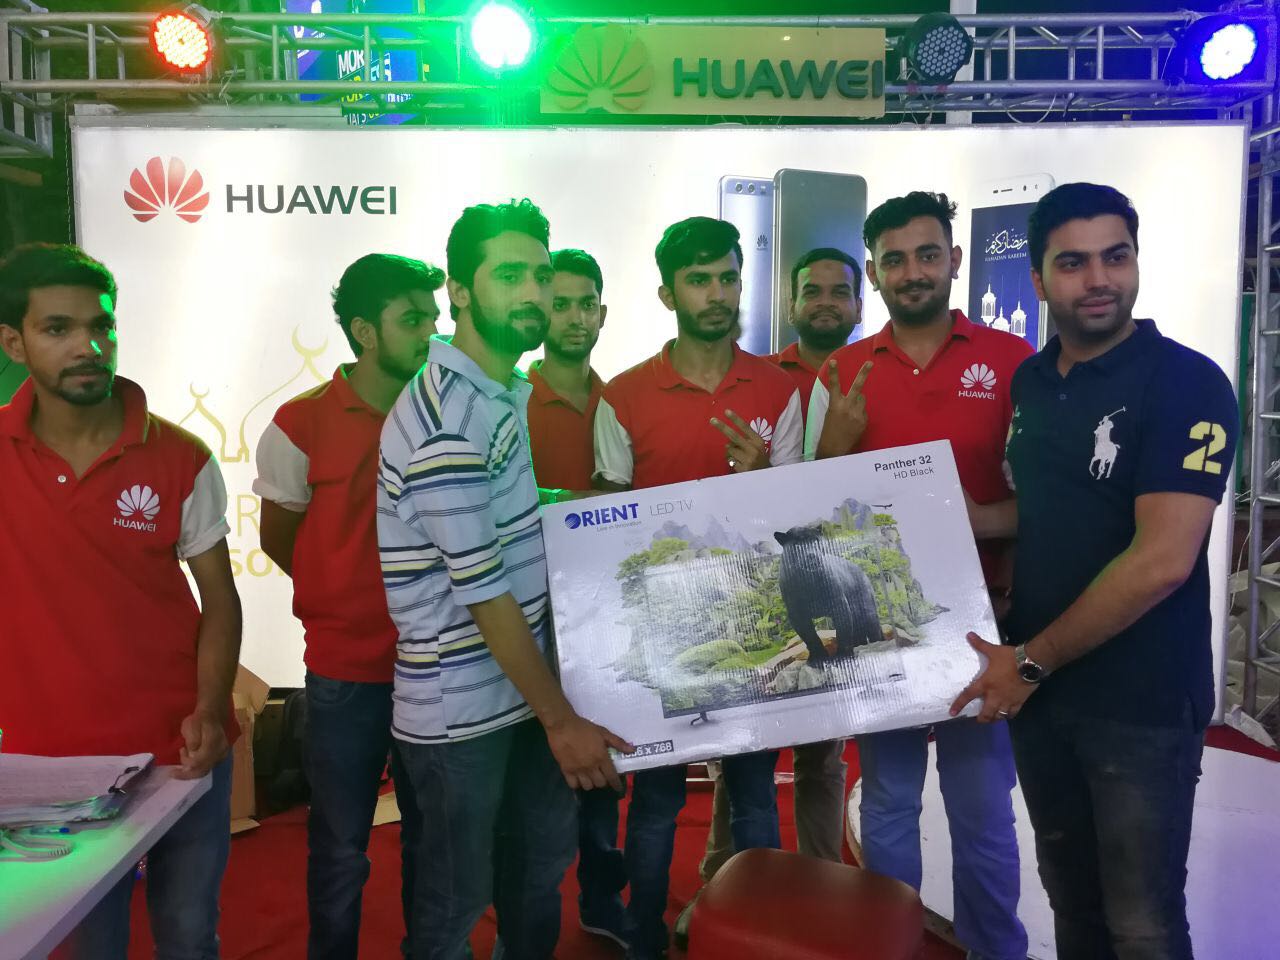 HUAWEI recently completed its latest campaign which was primarily focused on celebrating the joys sharing with their valued customers.